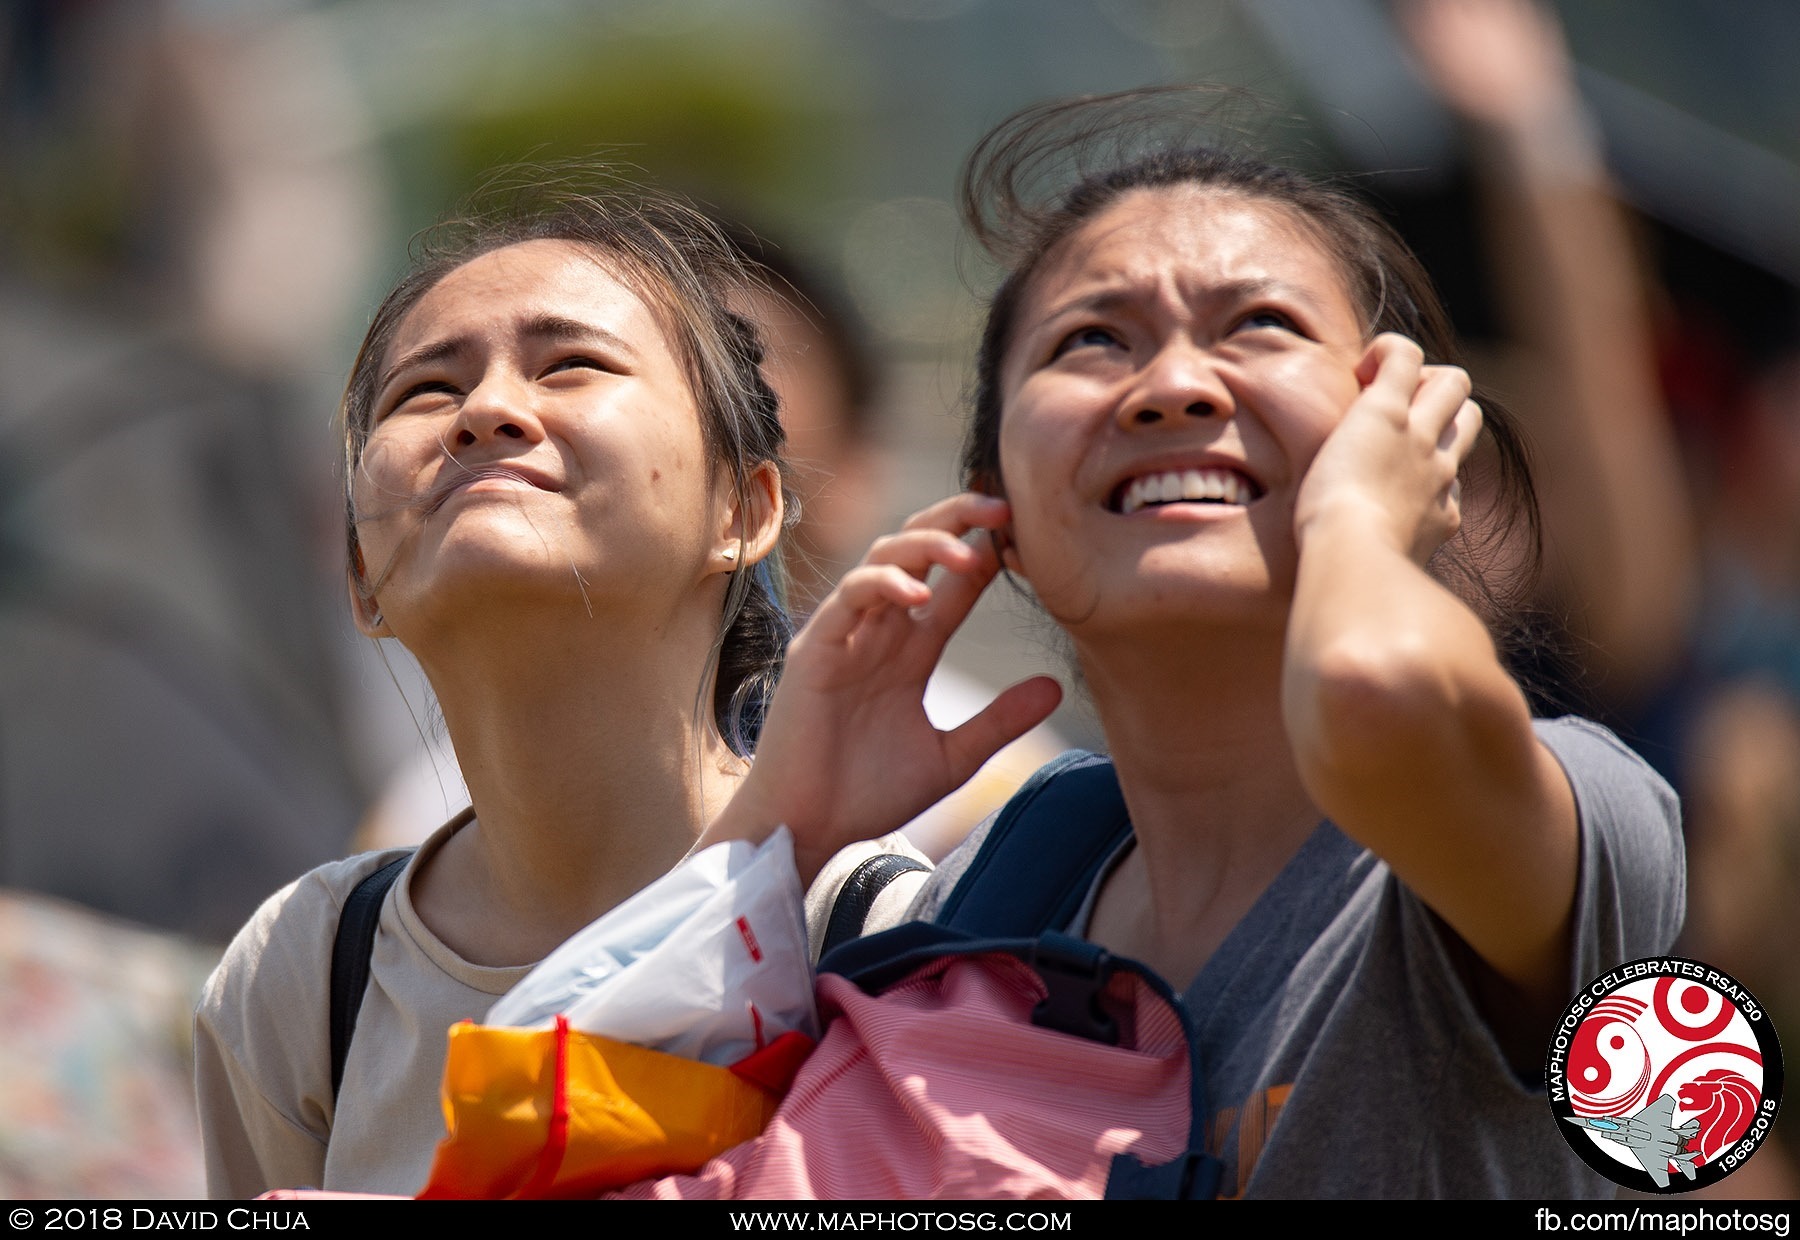 Spectators look up as the Fighter Aerial Display begins with the sound of freedom.